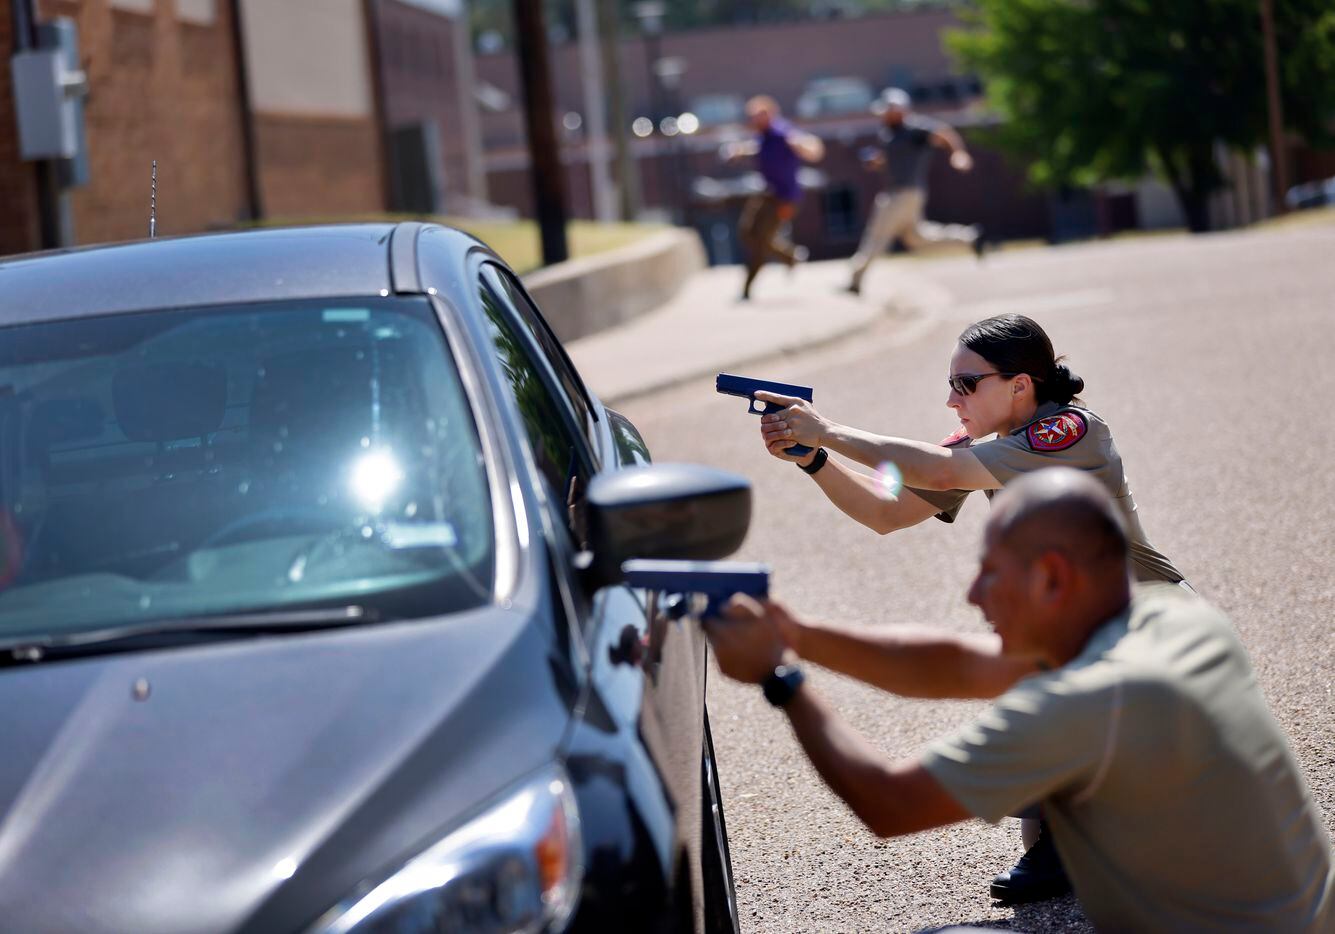 During a training session, Texas DPS Trooper Melissa Goodreau and Athens Police Officer...